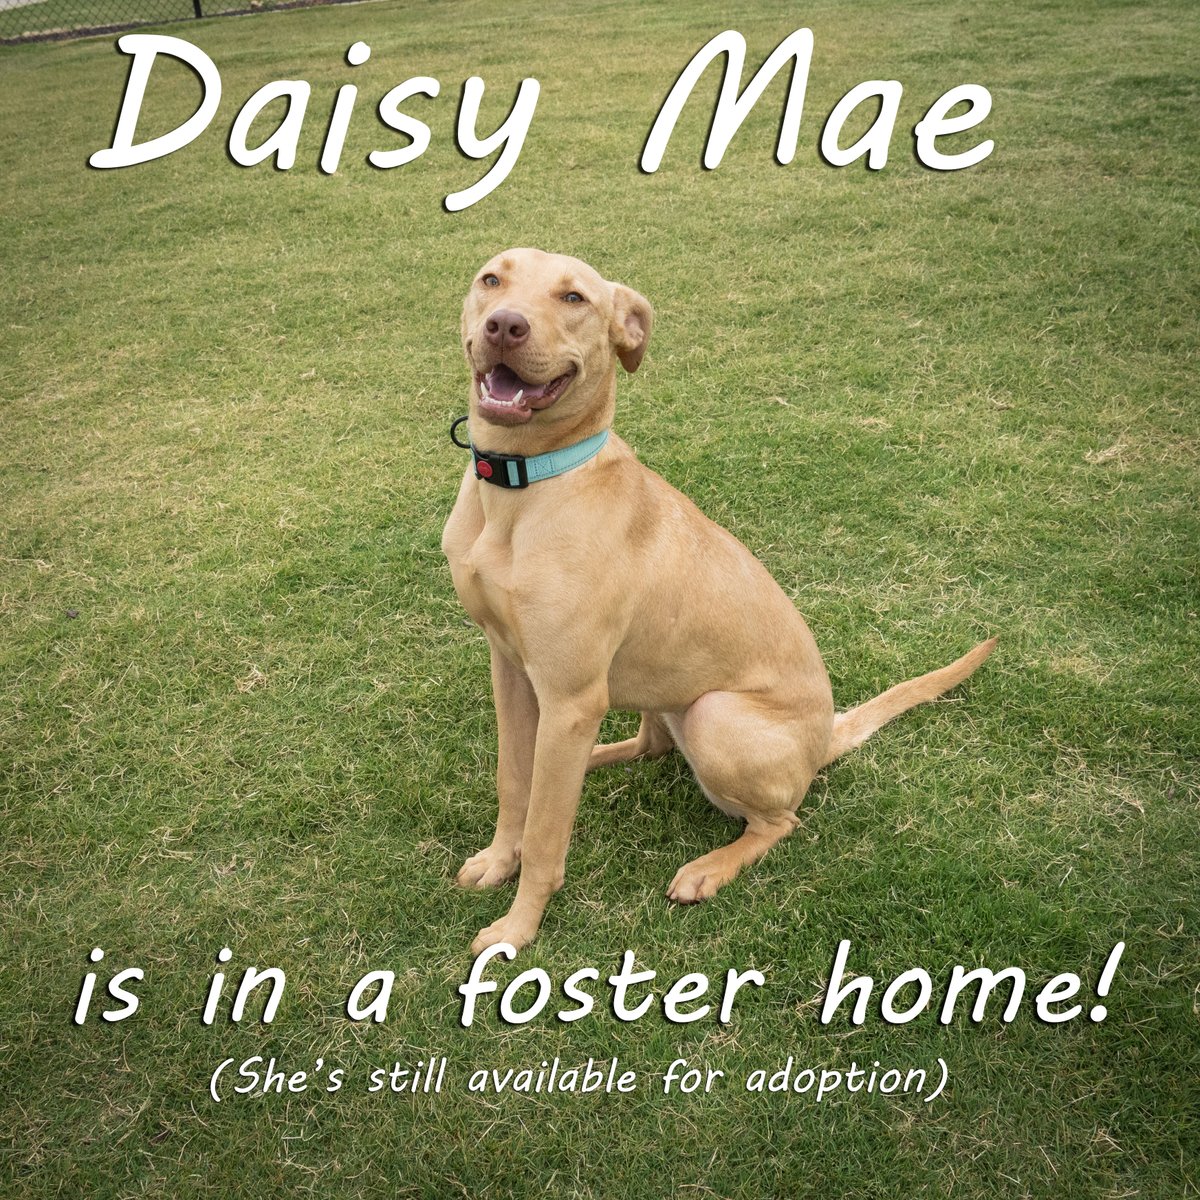 Daisy Mae is now in a foster home! She's still available for adoption, so if you'd like to meet and adopt this sweet girl, email the foster at ckostik27@gmail.com.

#AndersonCountyPAWS #adoptatPAWS #adopt #foster #rescue #southcarolina #adoptables #adoptadog #shelterdog